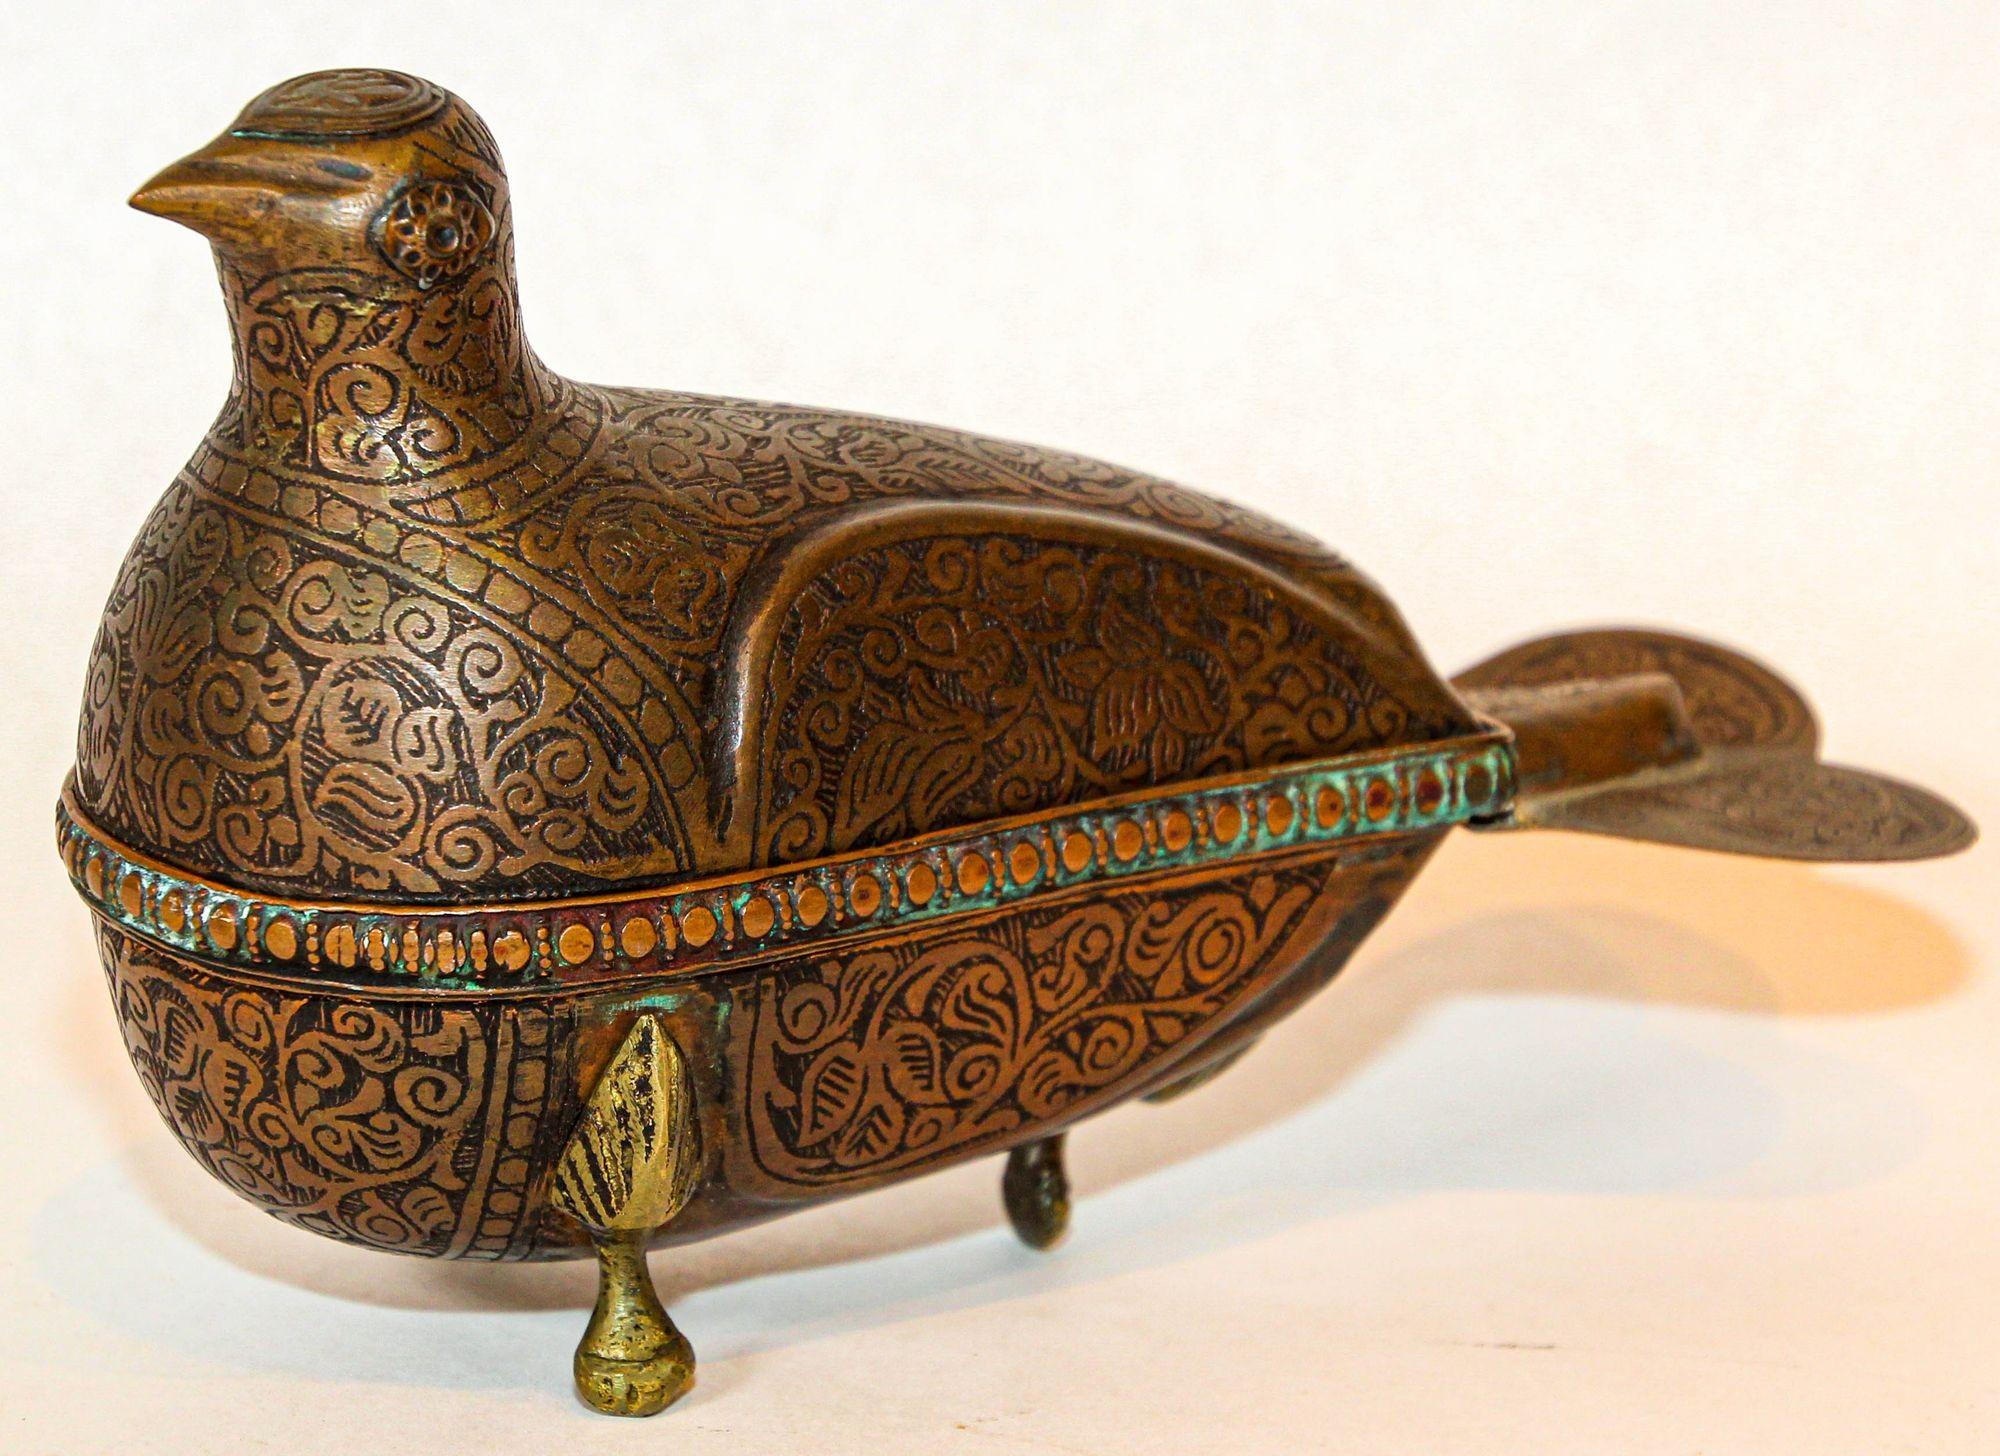 1920s Antique metal copper standing dove bird shaped betel box.Large Indo-Persian chiseled copper bronze box in Islamic Art style.The lidded container is a fine, scptural item handcrafted, etched and covered in intricate carvings, lidded covered